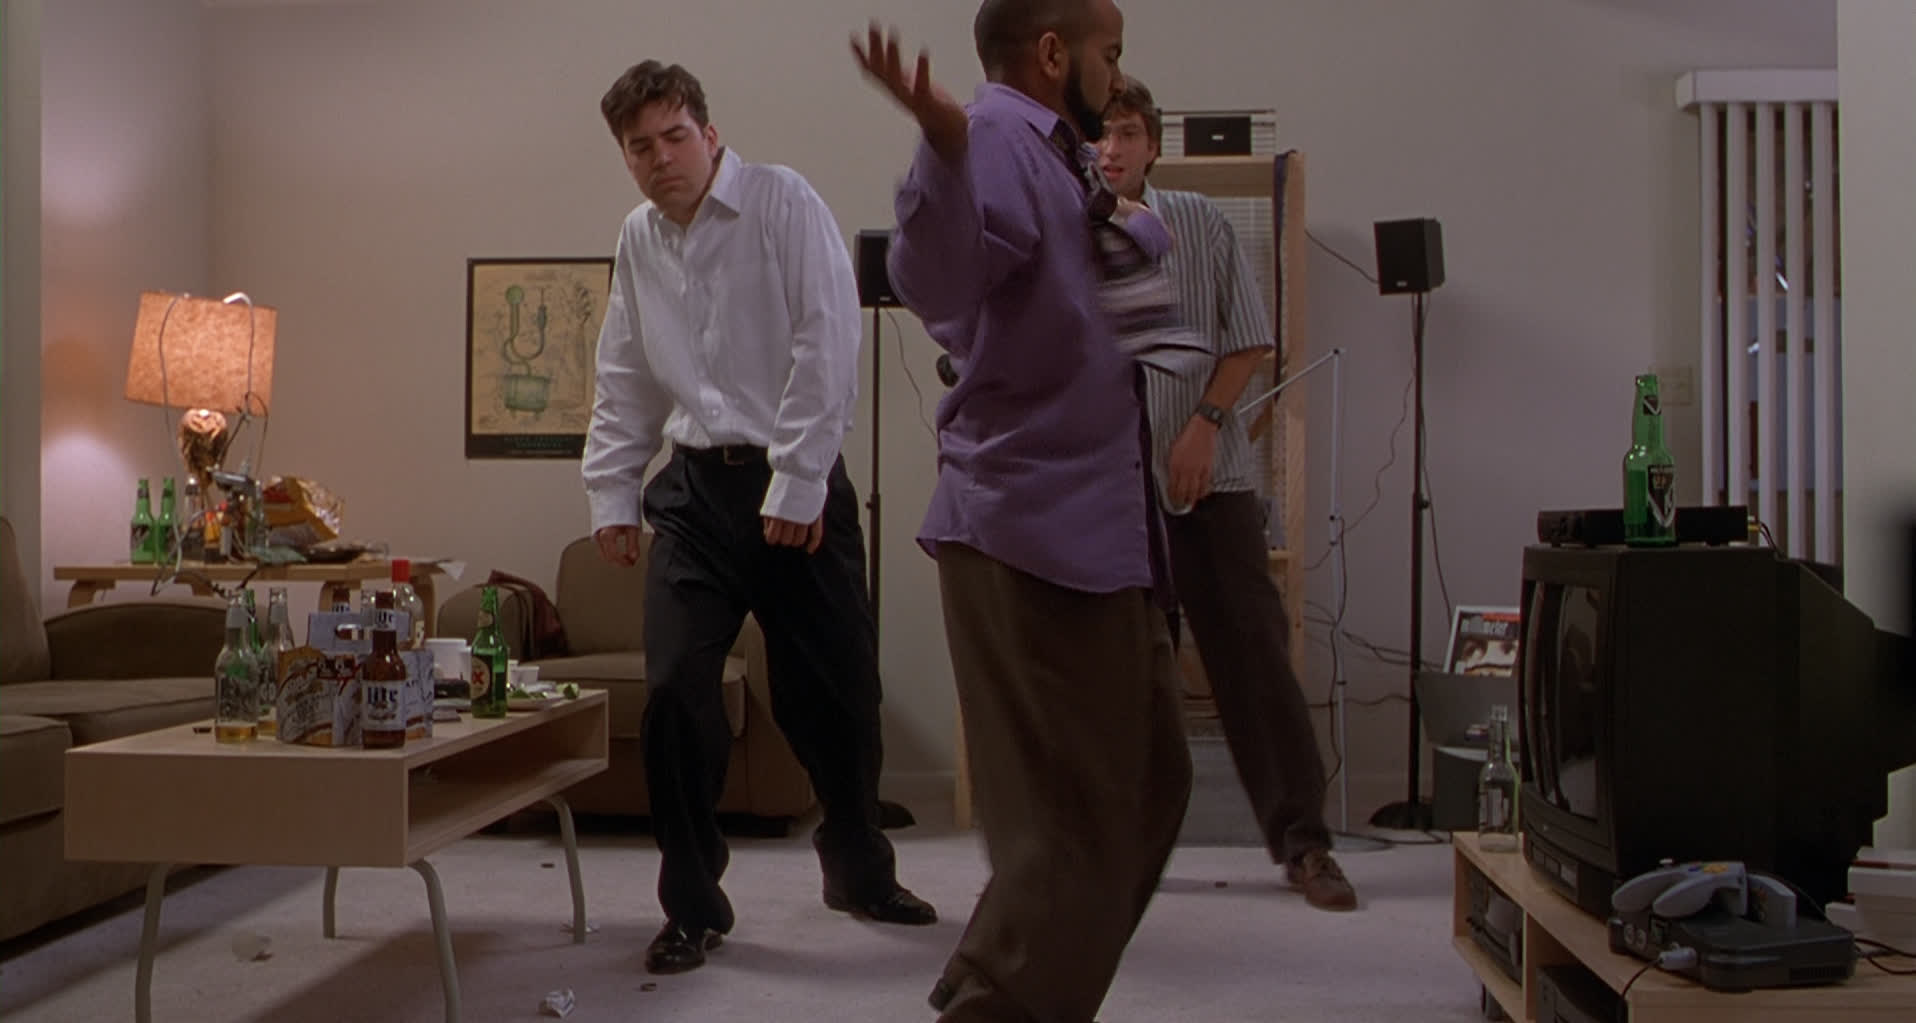 Image of the three programmers from Office Space dancing, with a Nintendo 64 on the right side of the frame